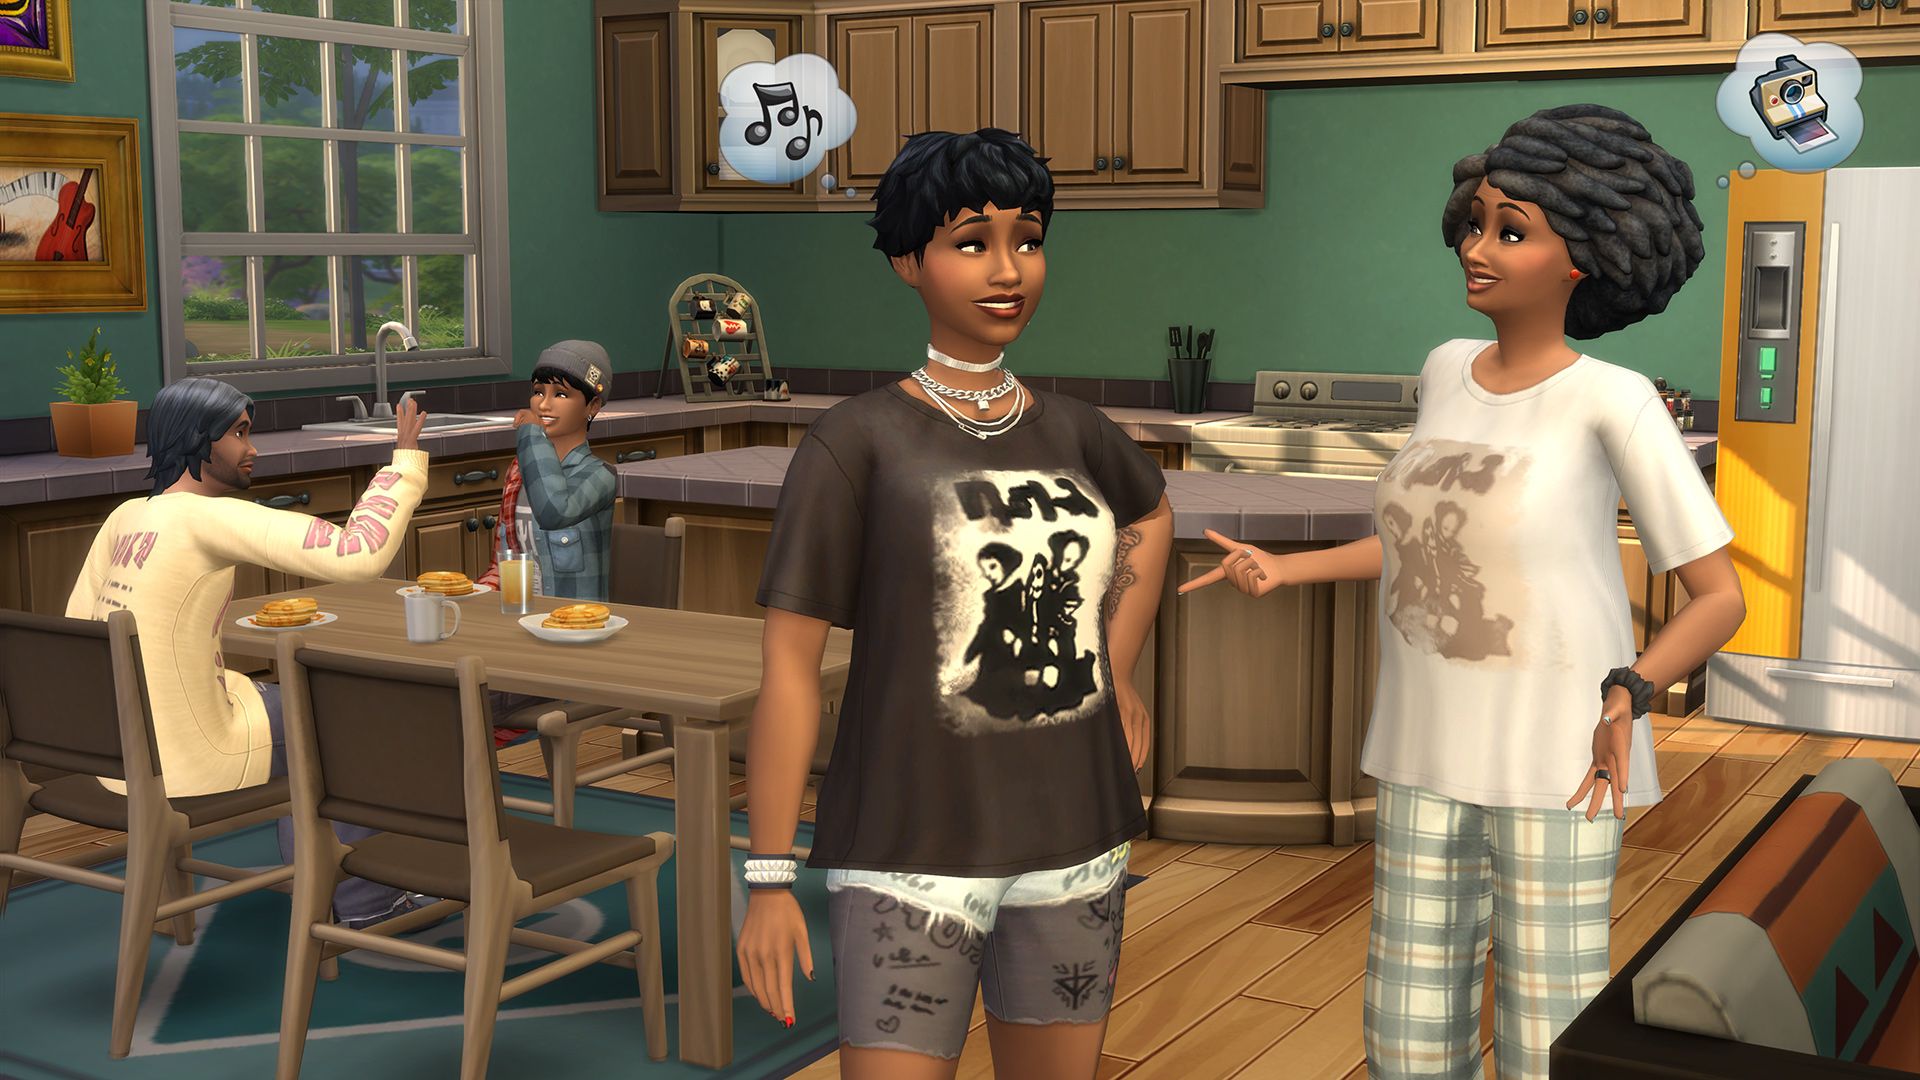 Sims 4 family in grunge outfits in their kitchen